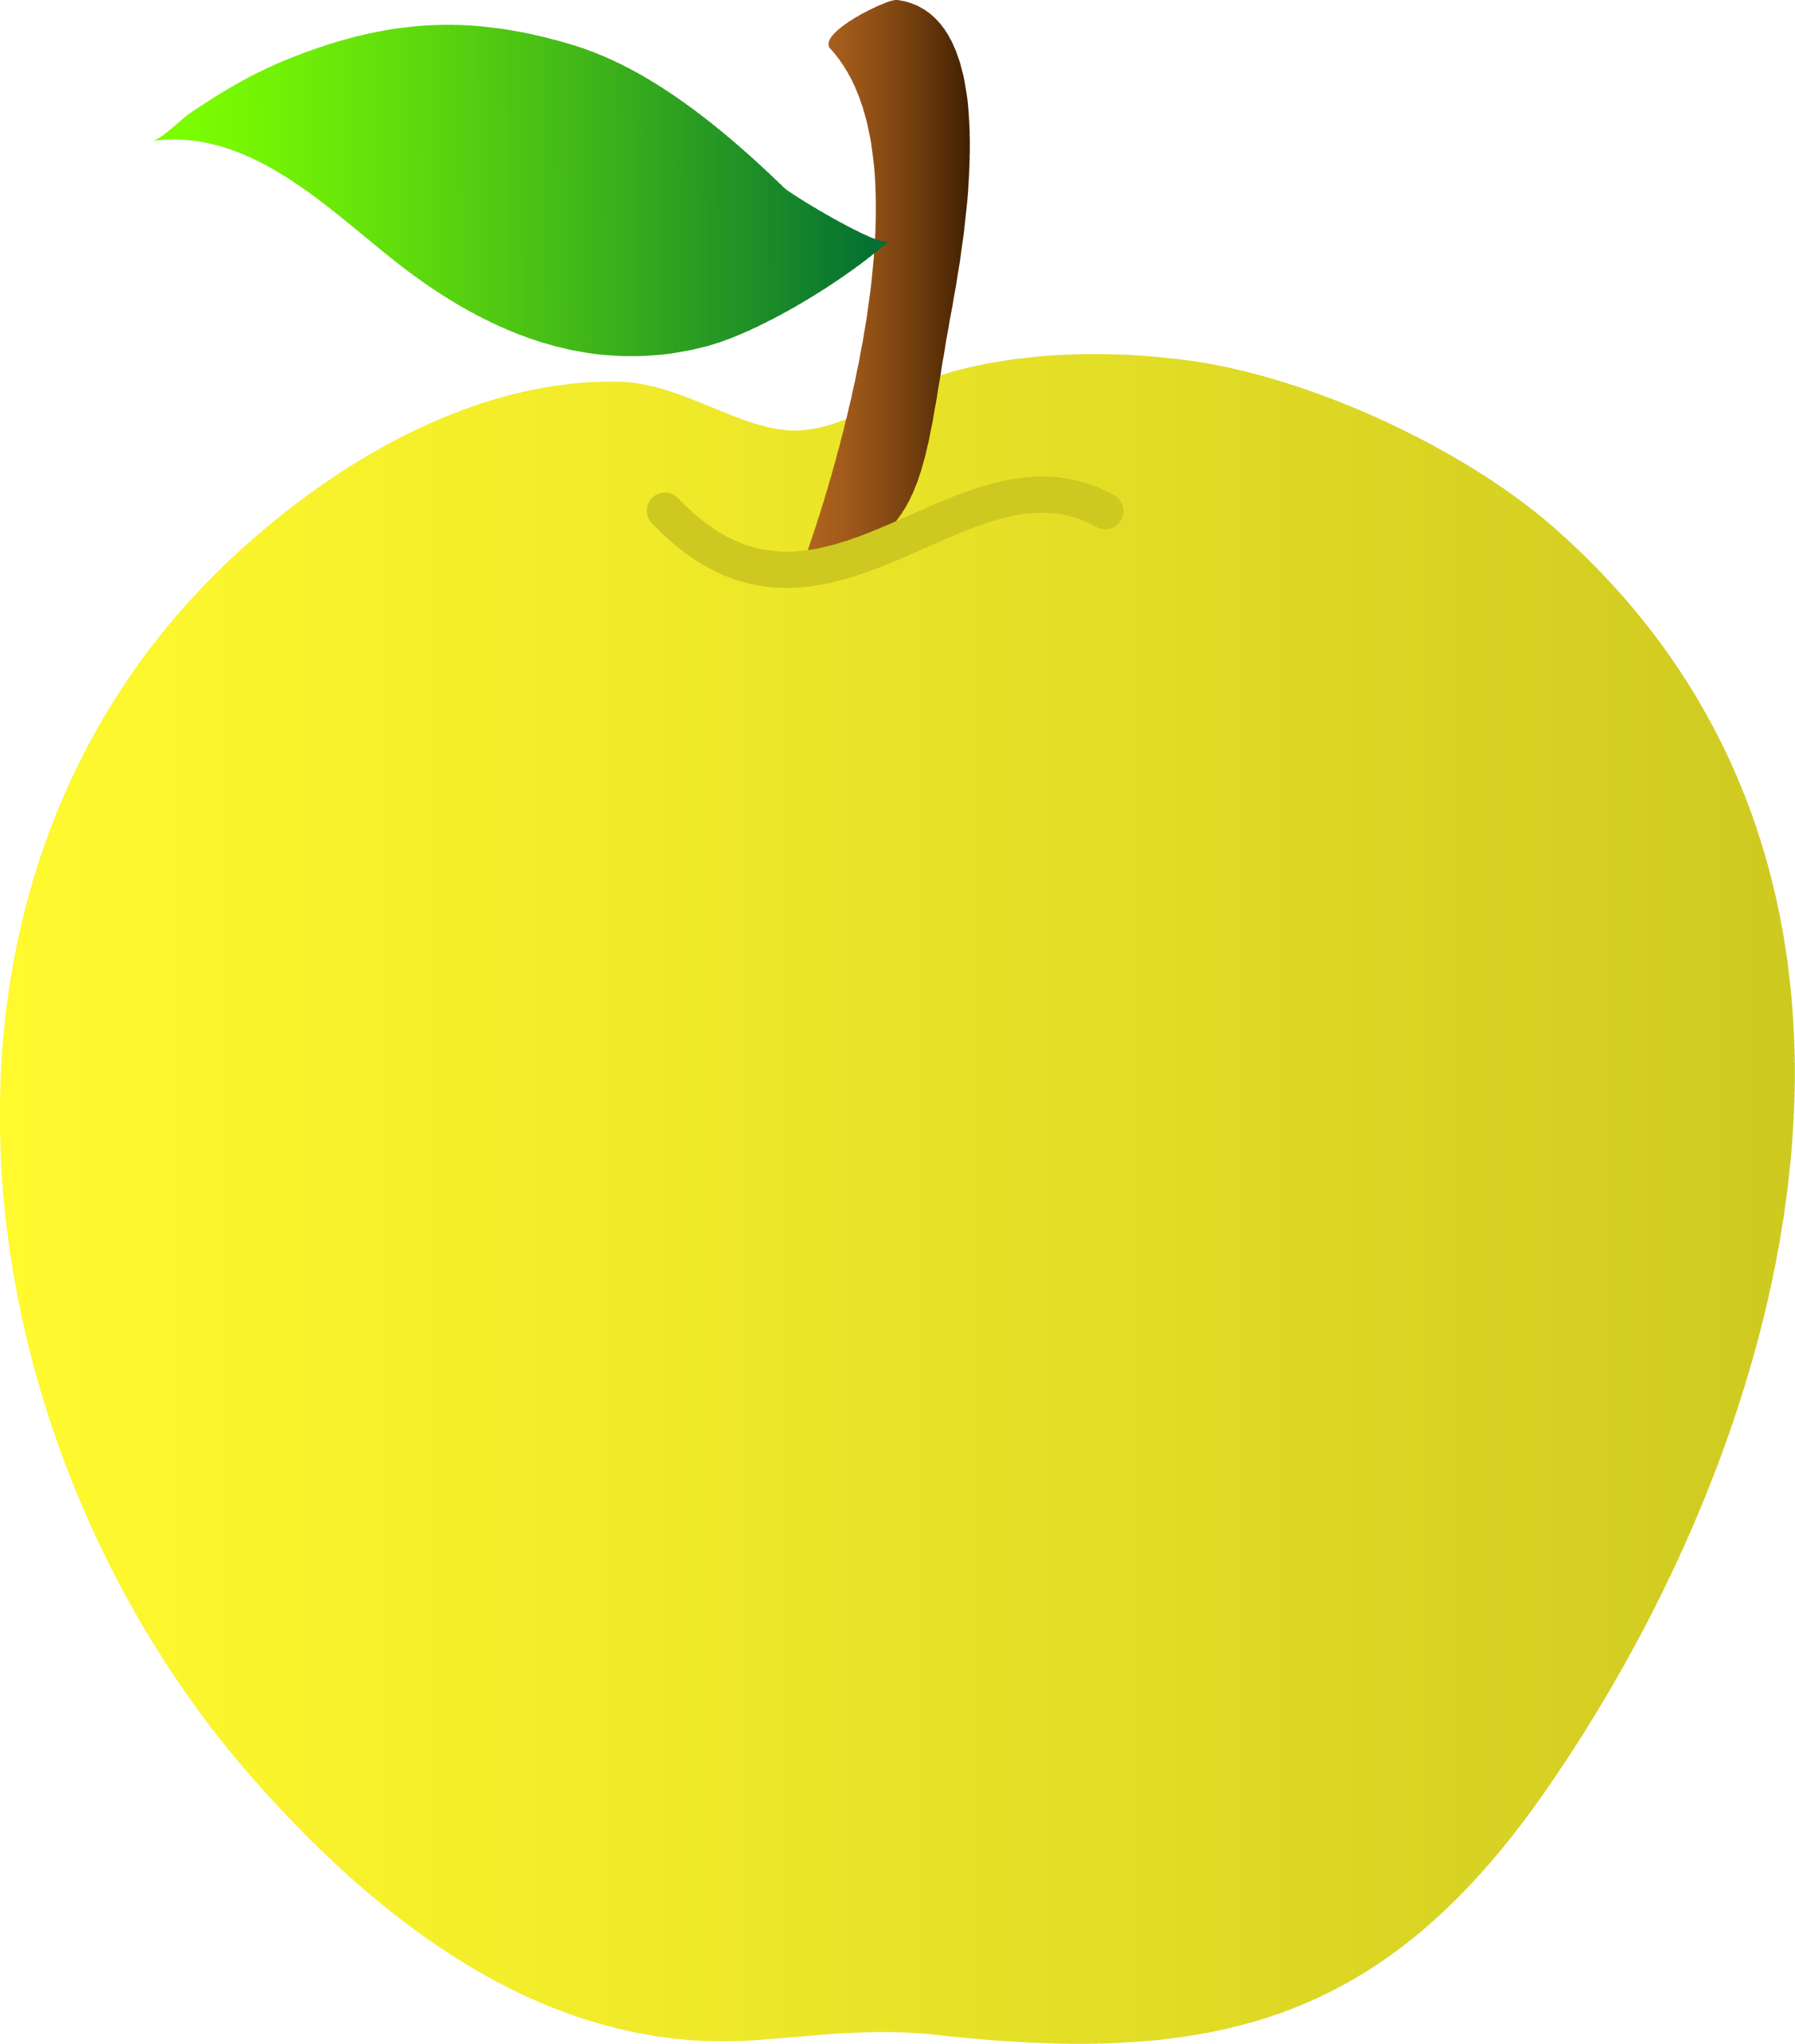 free clipart of an apple - photo #45